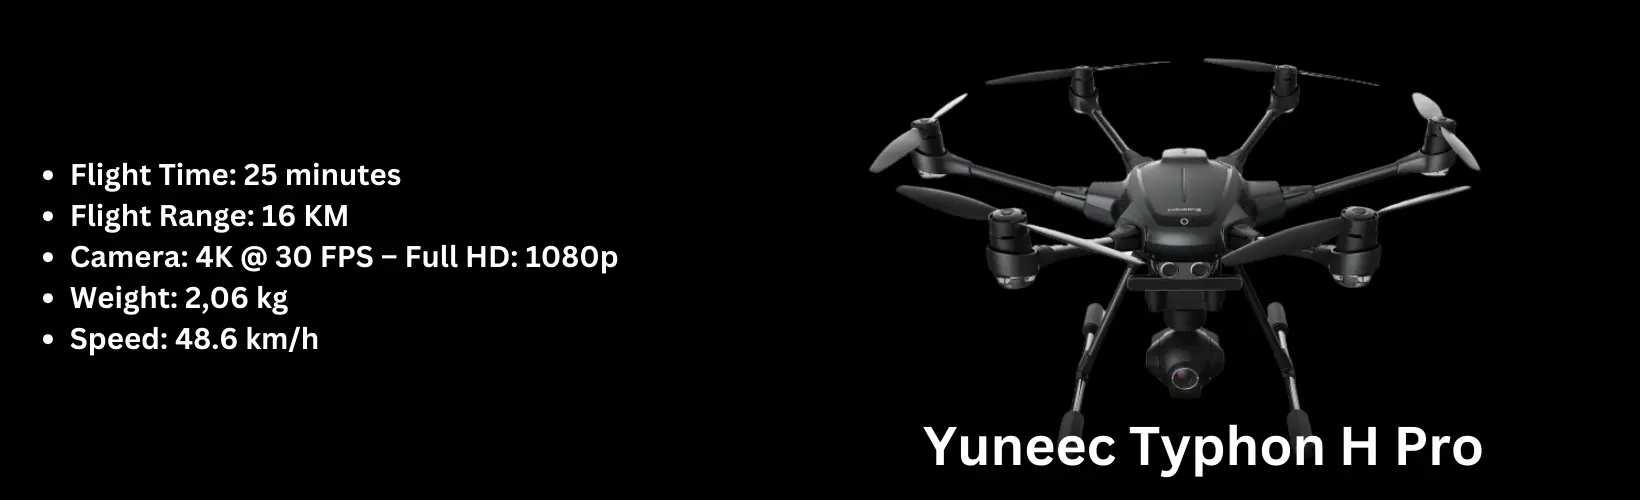 Yuneec-Typhon-H-Pro-specifications